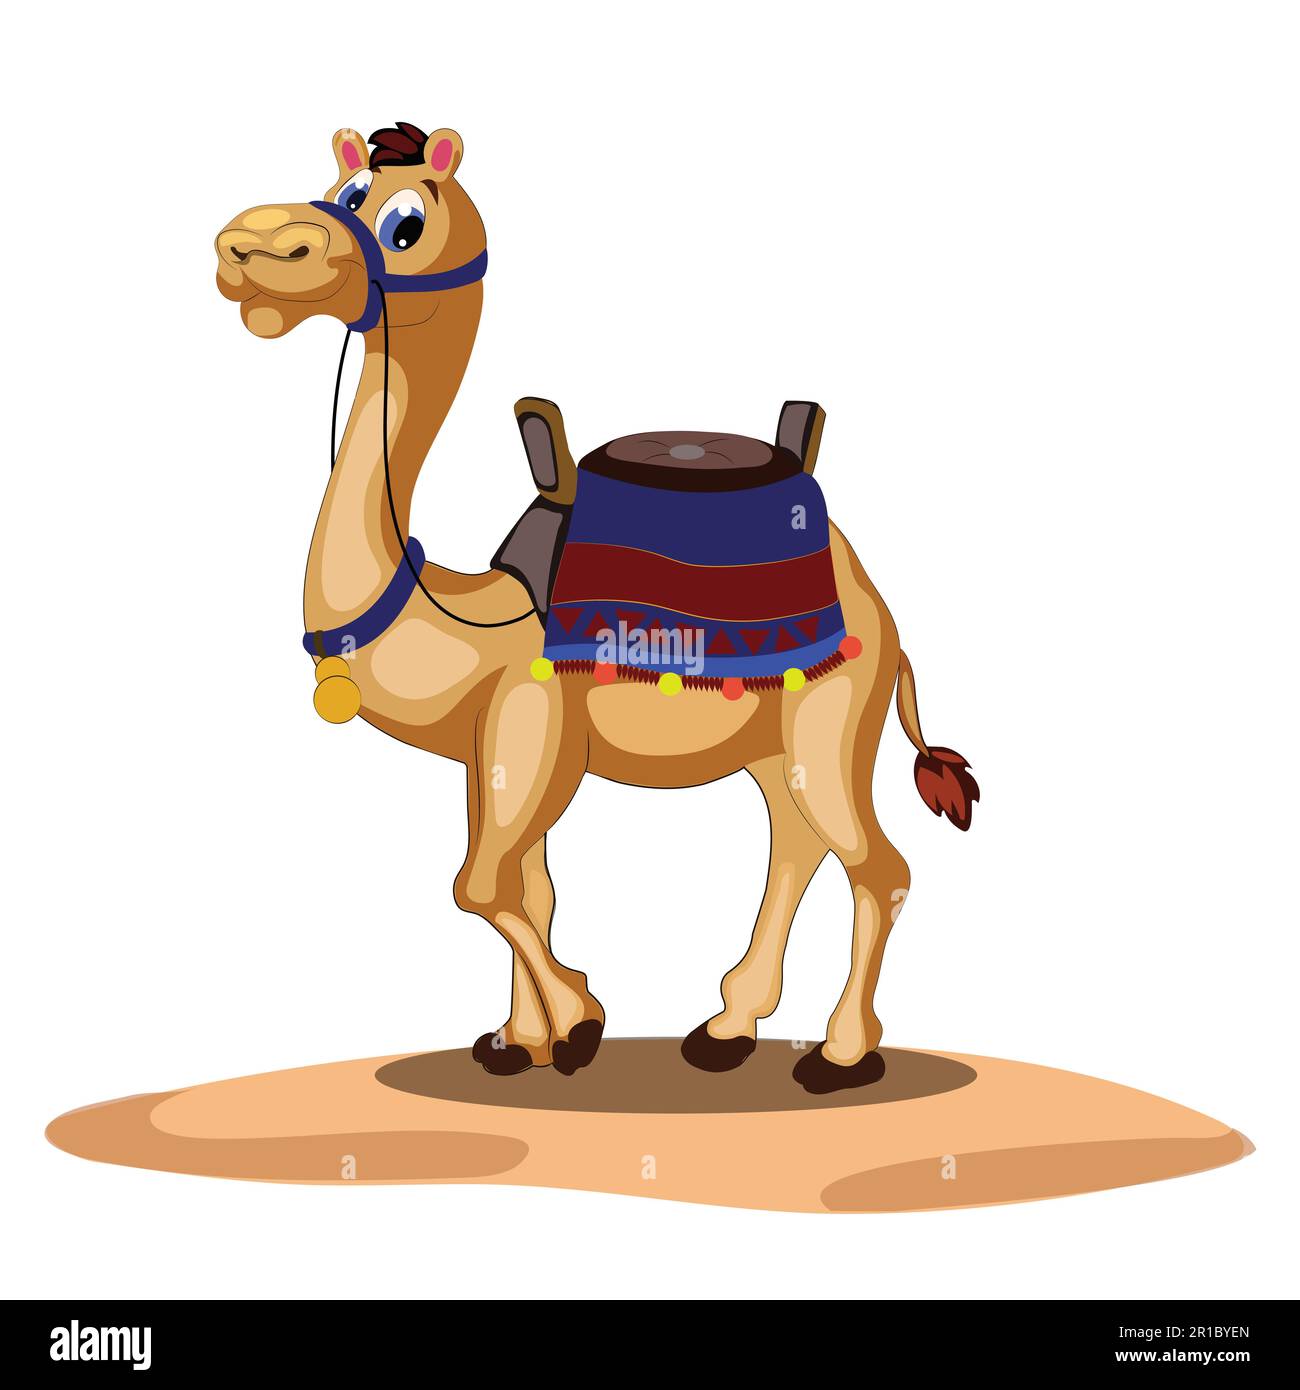 Cartoon camel isolated on white background. Cute camel cartoon with saddlery. Cartoon funny camel with saddlery vector illustration. Cute cartoon came Stock Vector